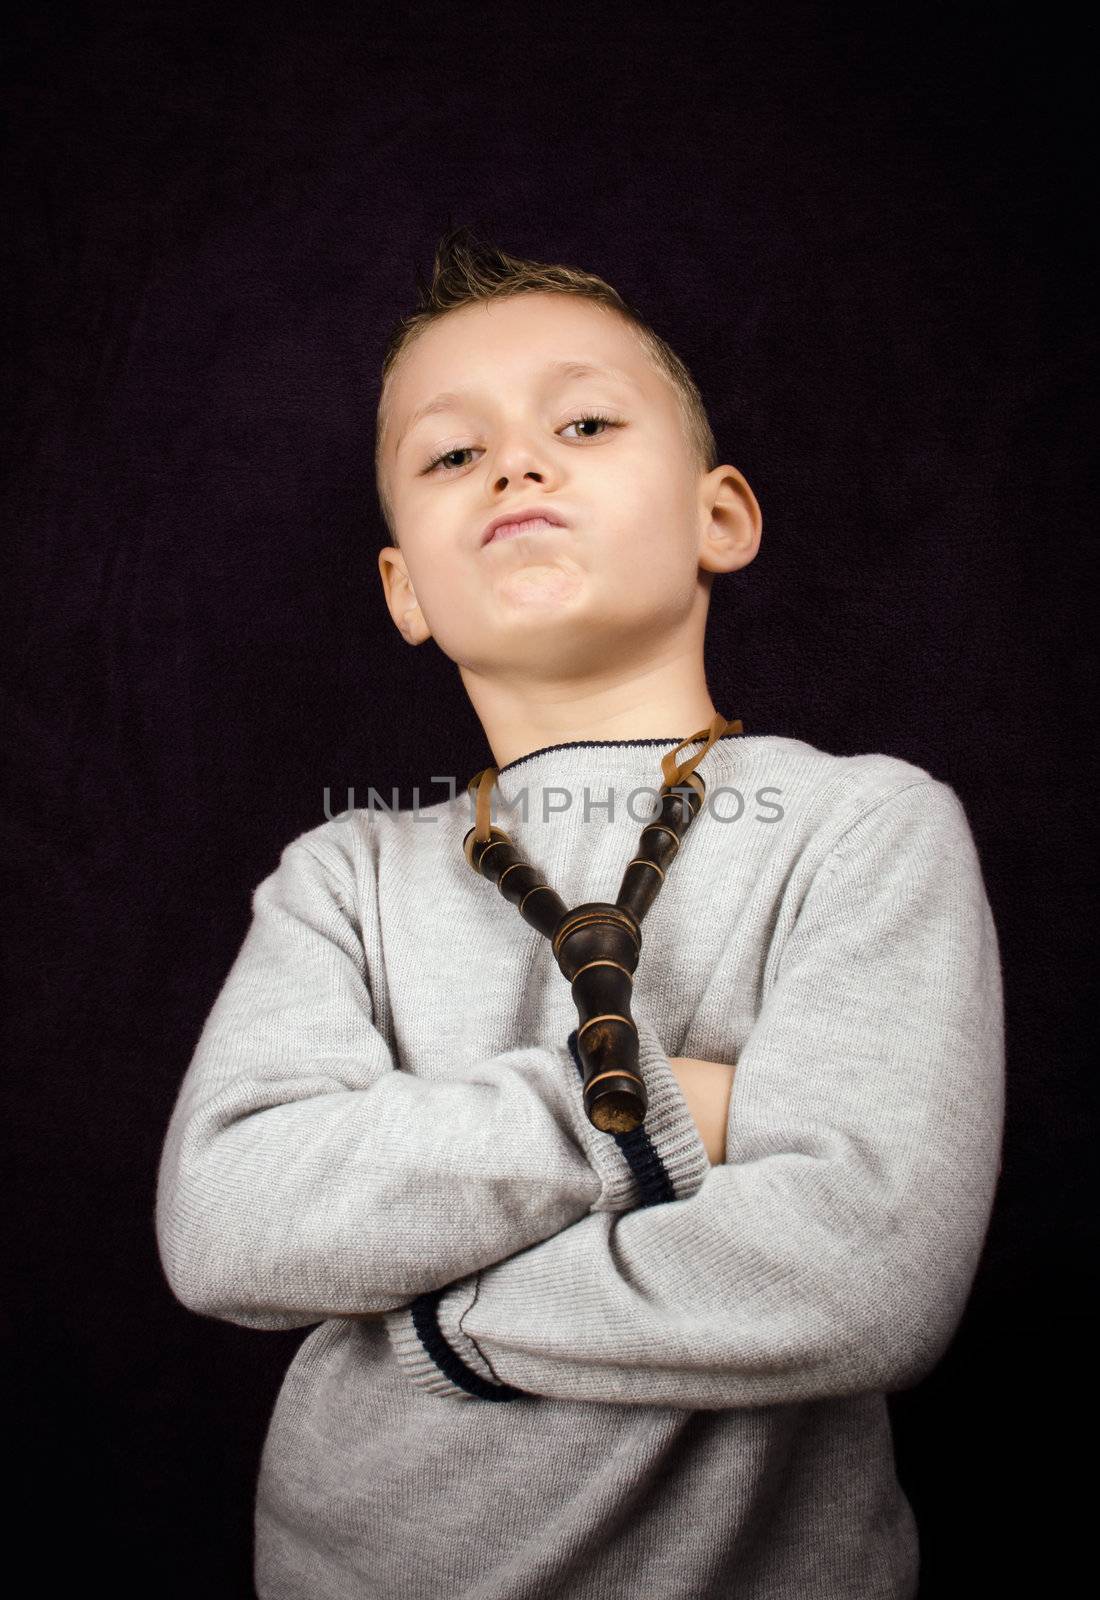 Studio shoot of a little boy with a bad attitude